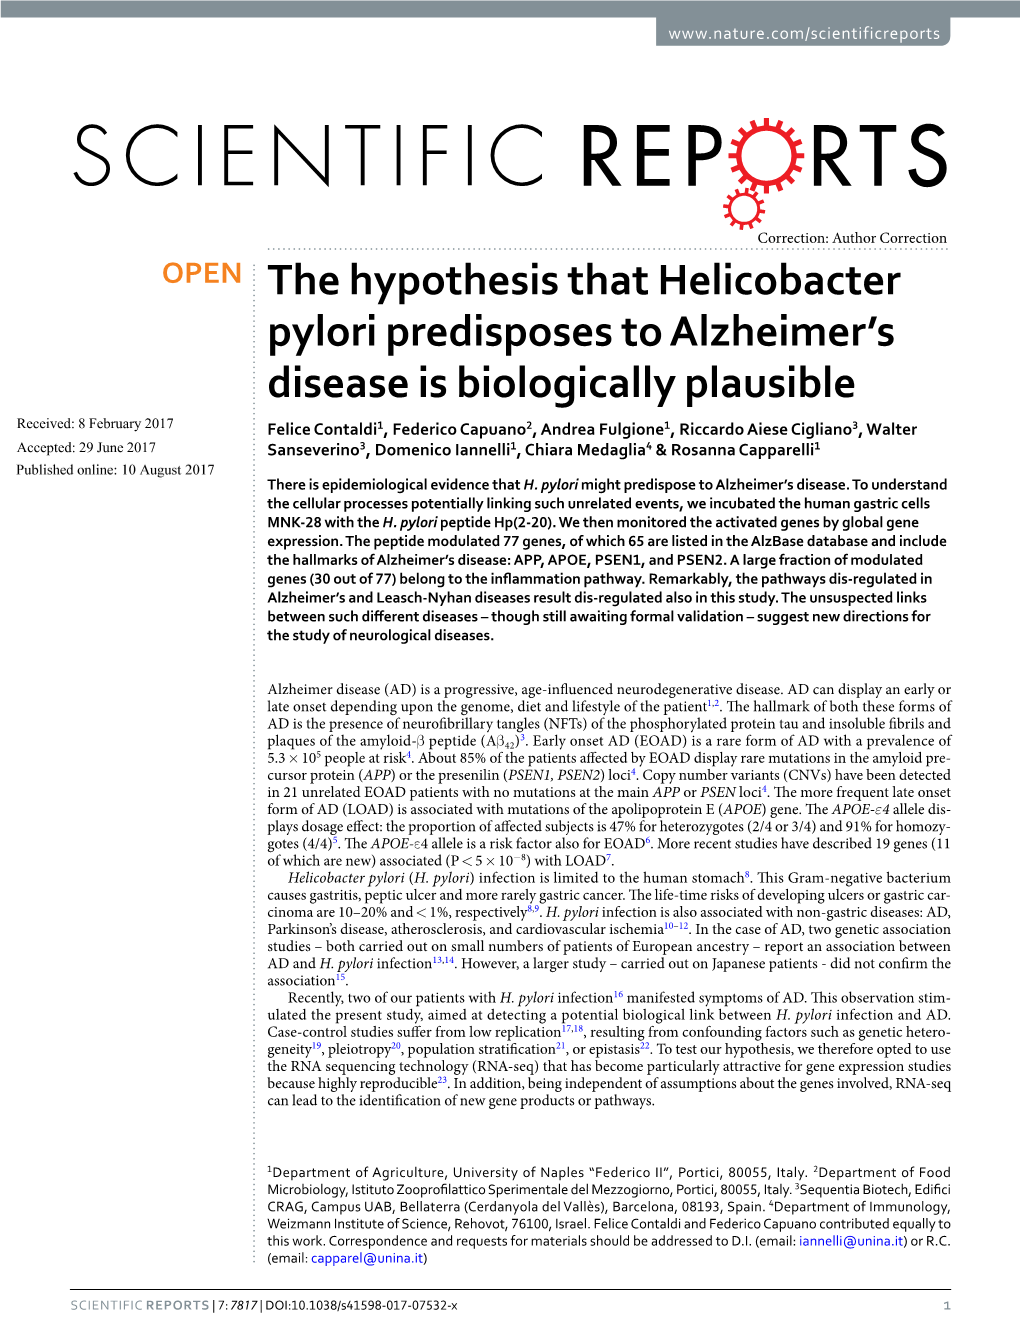 The Hypothesis That Helicobacter Pylori Predisposes to Alzheimer's